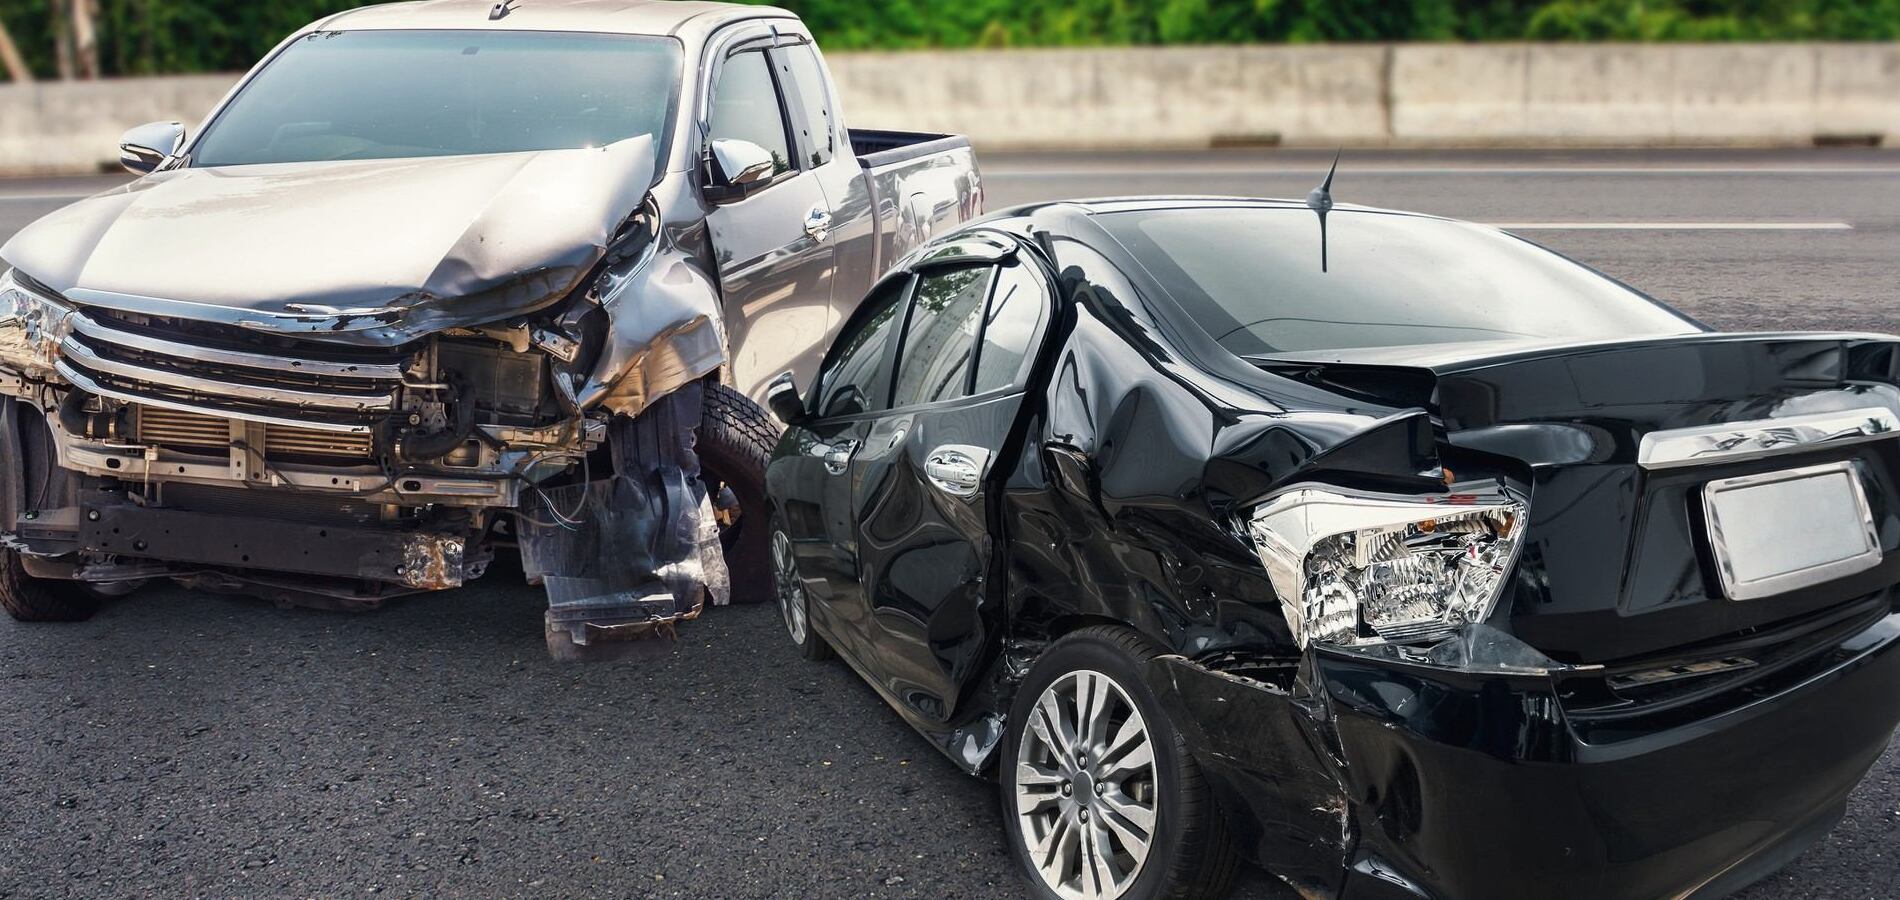 Car Accident Lawyer in Downey, CA